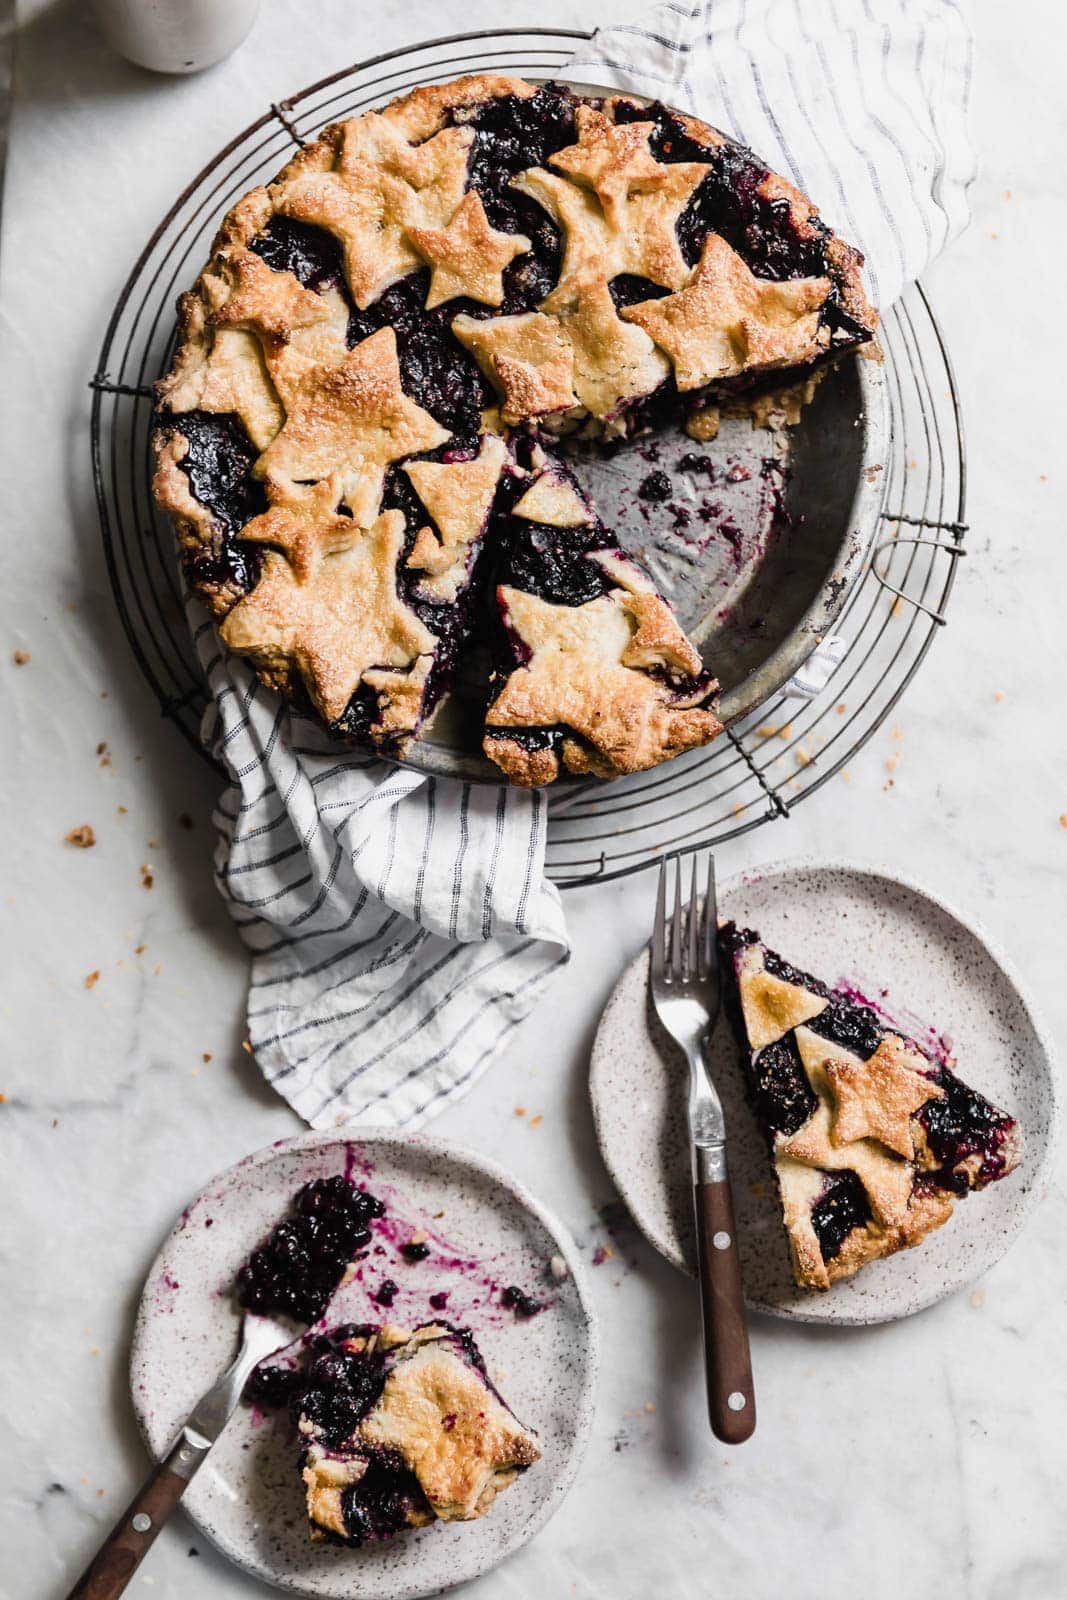 Our favorite blueberry pie for the 4th of July! With cute star cutouts on top to celebrate :)